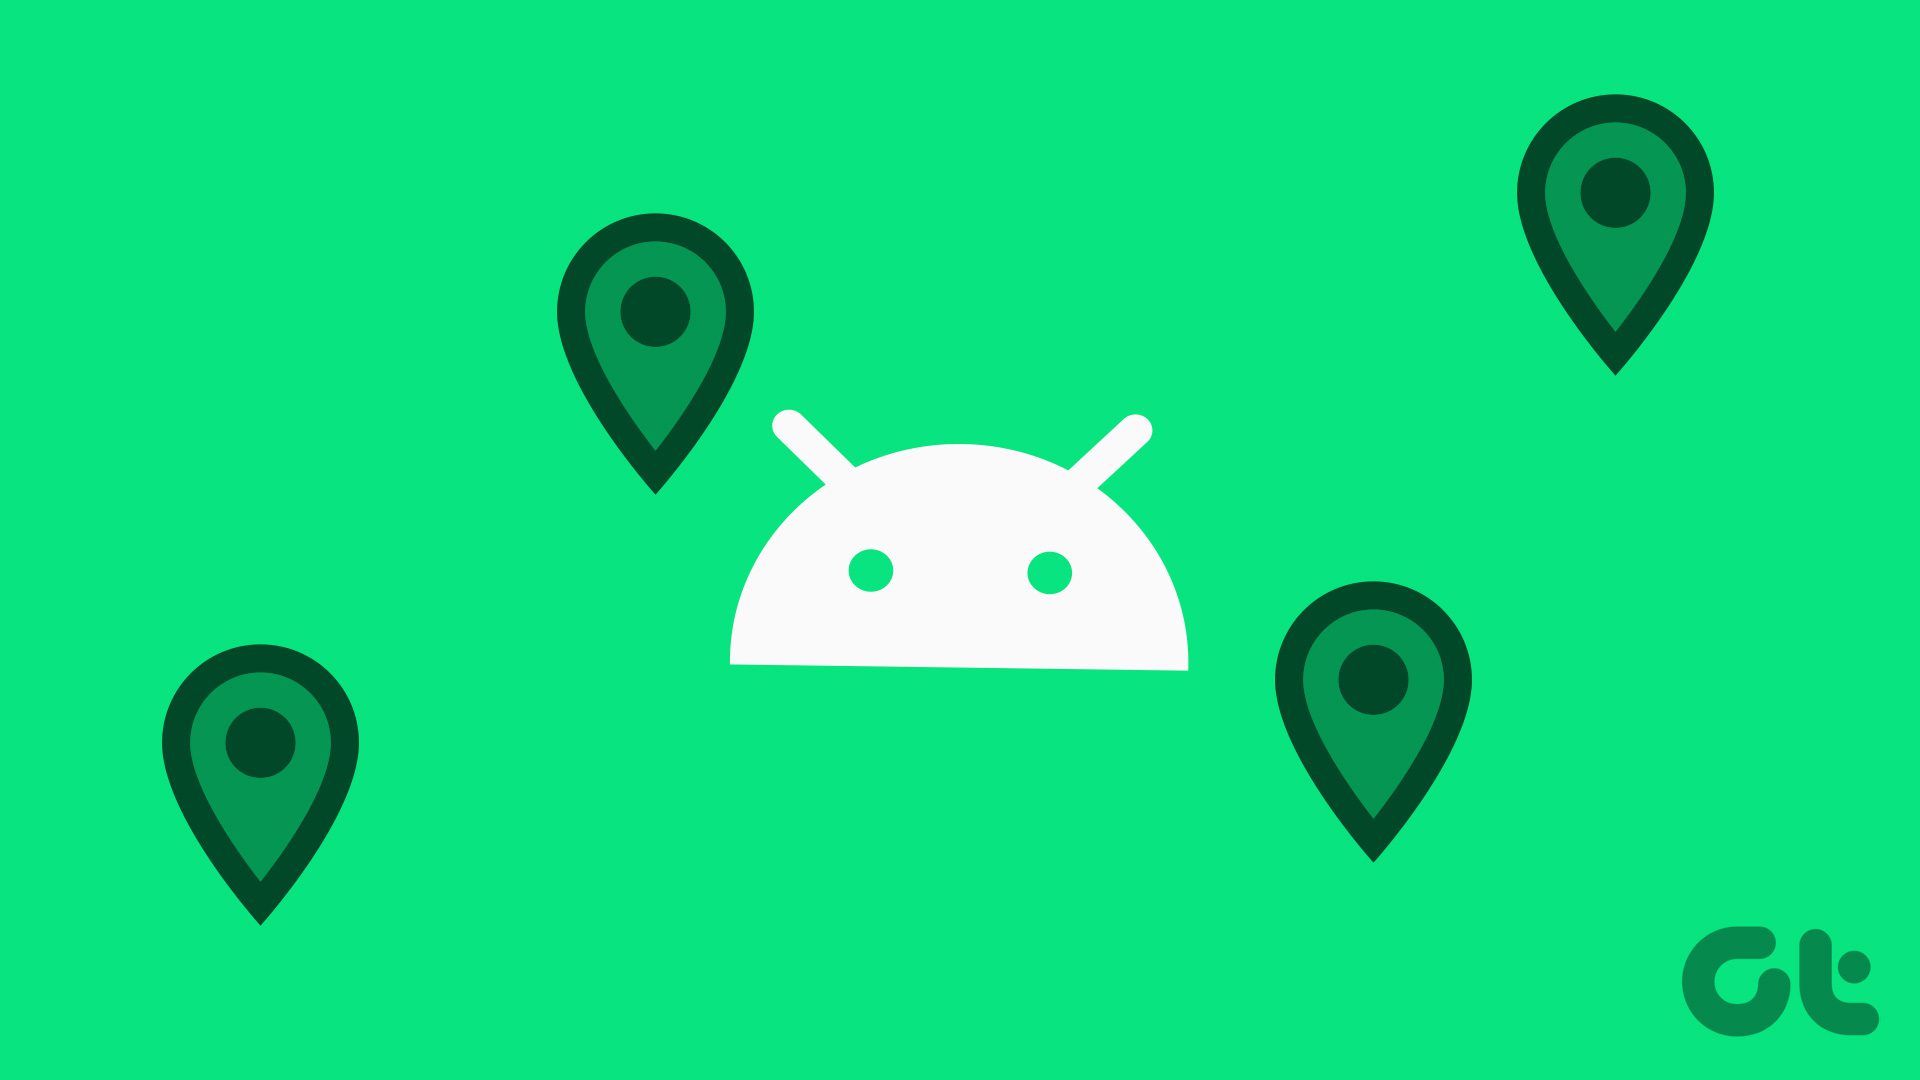 change or spoof your location on Android